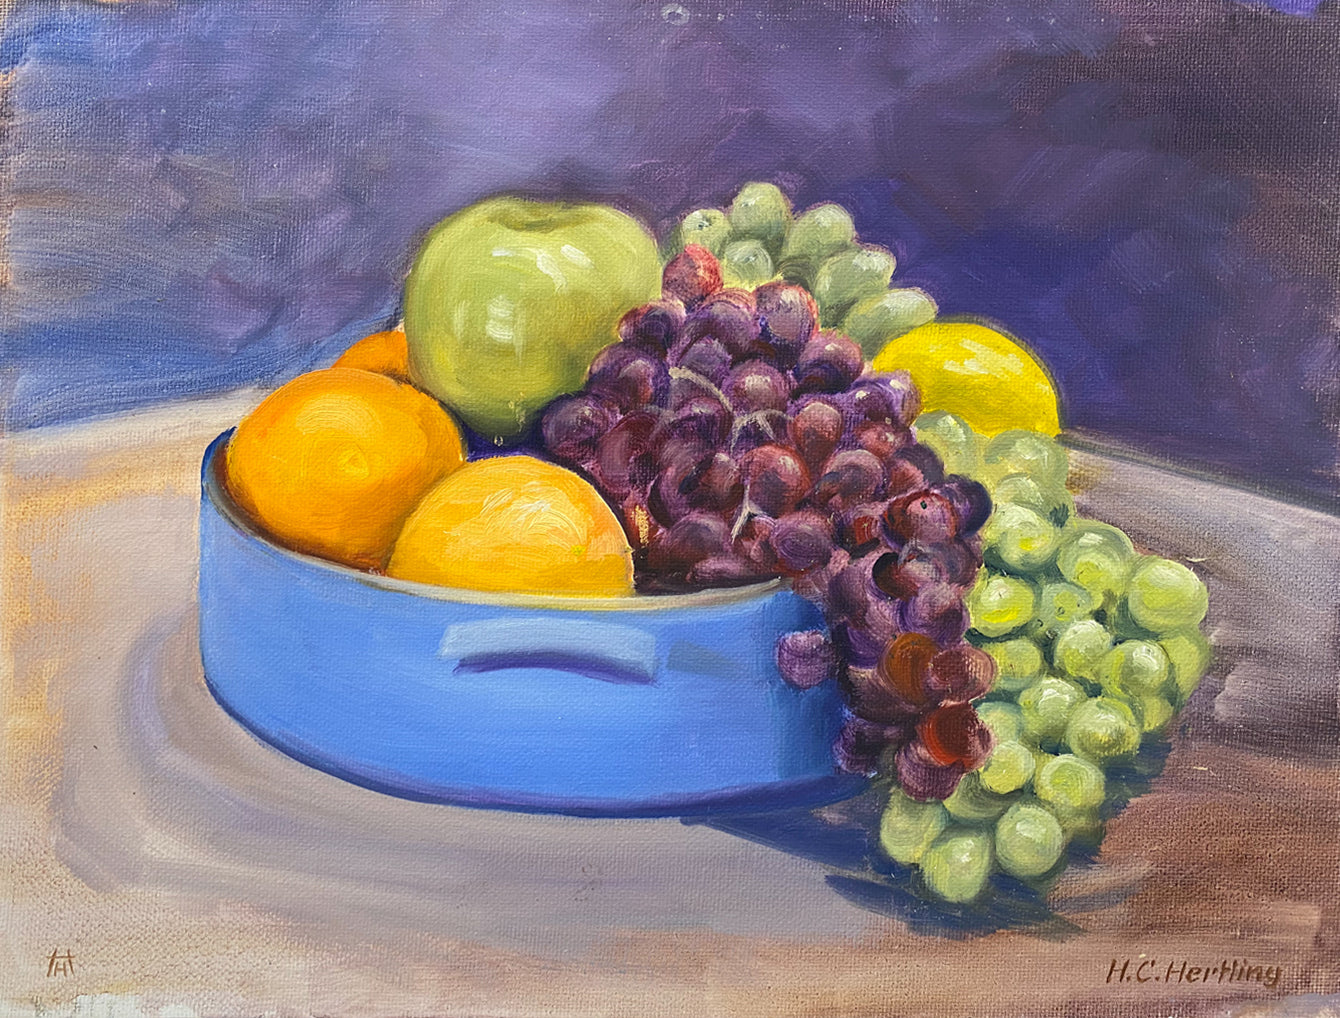 Fruit Bowl. Still life painting by Heiner Hertling.  Oil on board.  